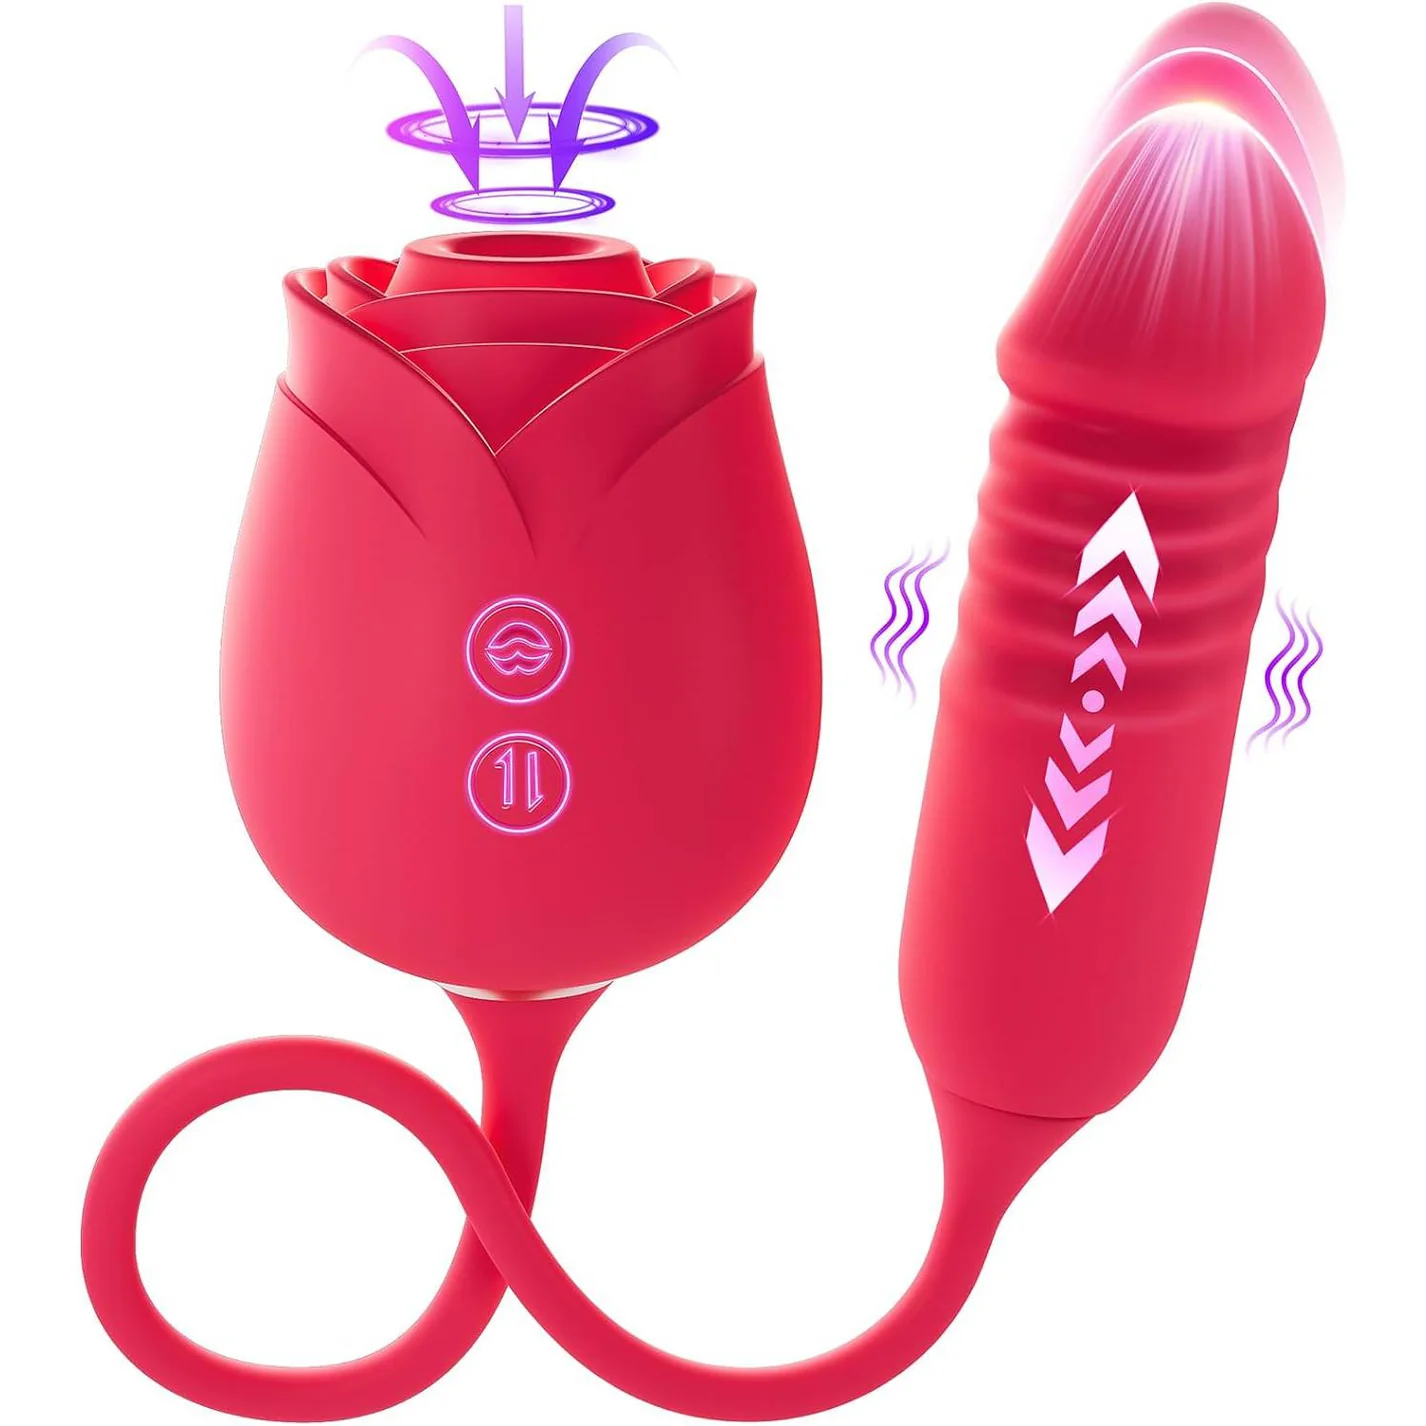 Vibrator Dildo Sex Toys for Women - Uprgraded Rose Sex Toy with Thrusting G Spot Vibrators & 10 Sucking Modes for Clitoral Nipple Stimulation Anal Dildos Adult Sex Toys Games for Couples Sex Machine